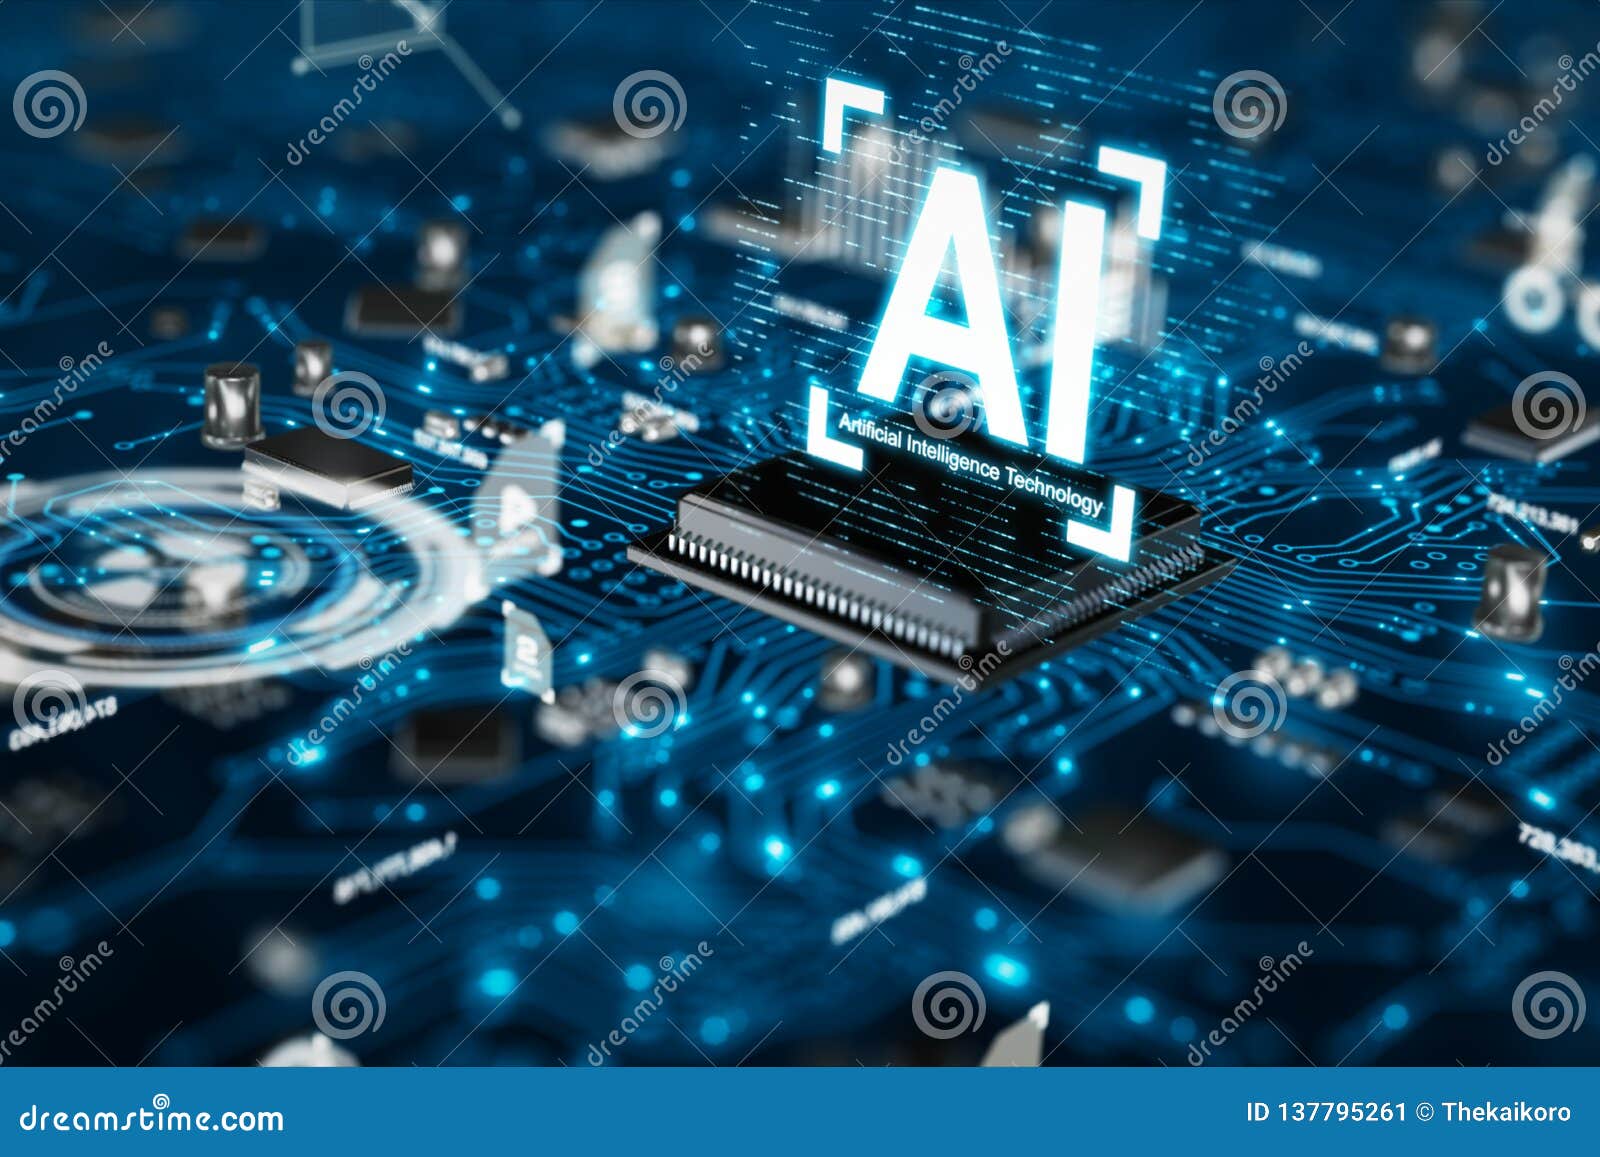 3d render ai artificial intelligence technology cpu central processor unit chipset on the printed circuit board for electronic and